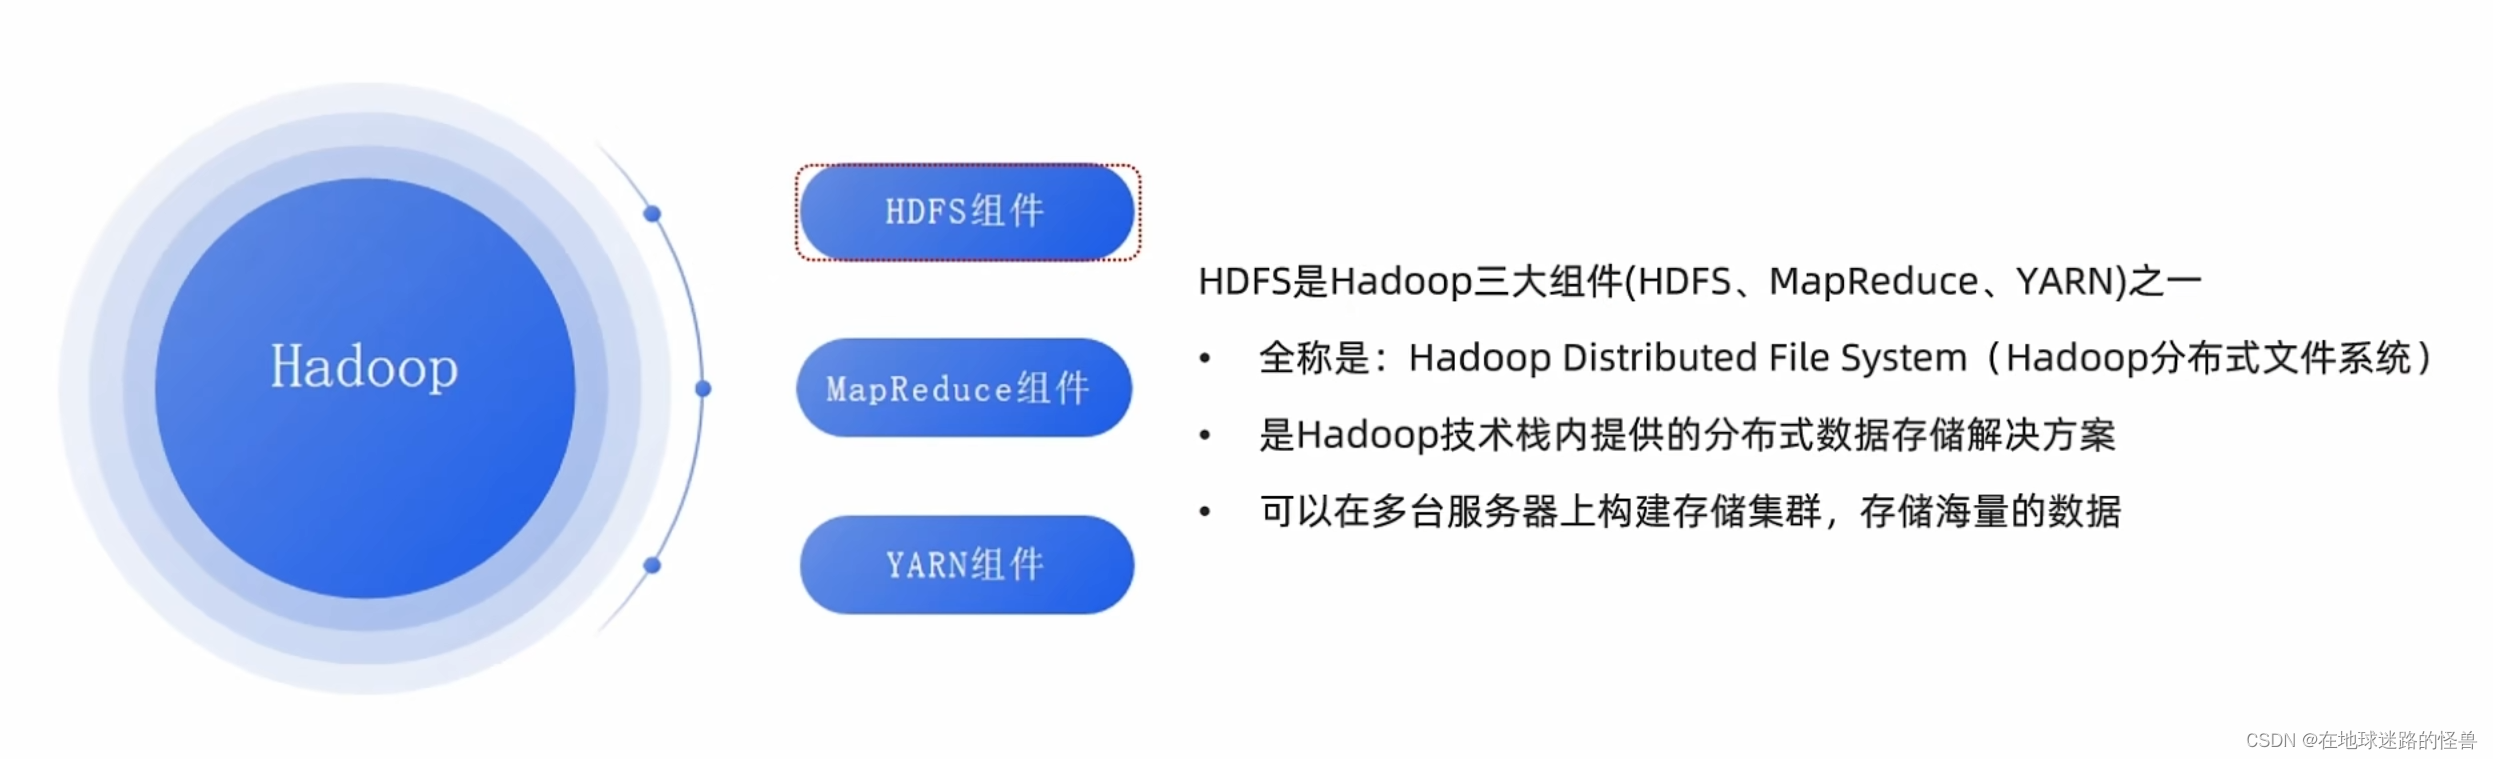 <span style='color:red;'>云</span>上<span style='color:red;'>配置</span><span style='color:red;'>Hadoop</span><span style='color:red;'>环境</span>